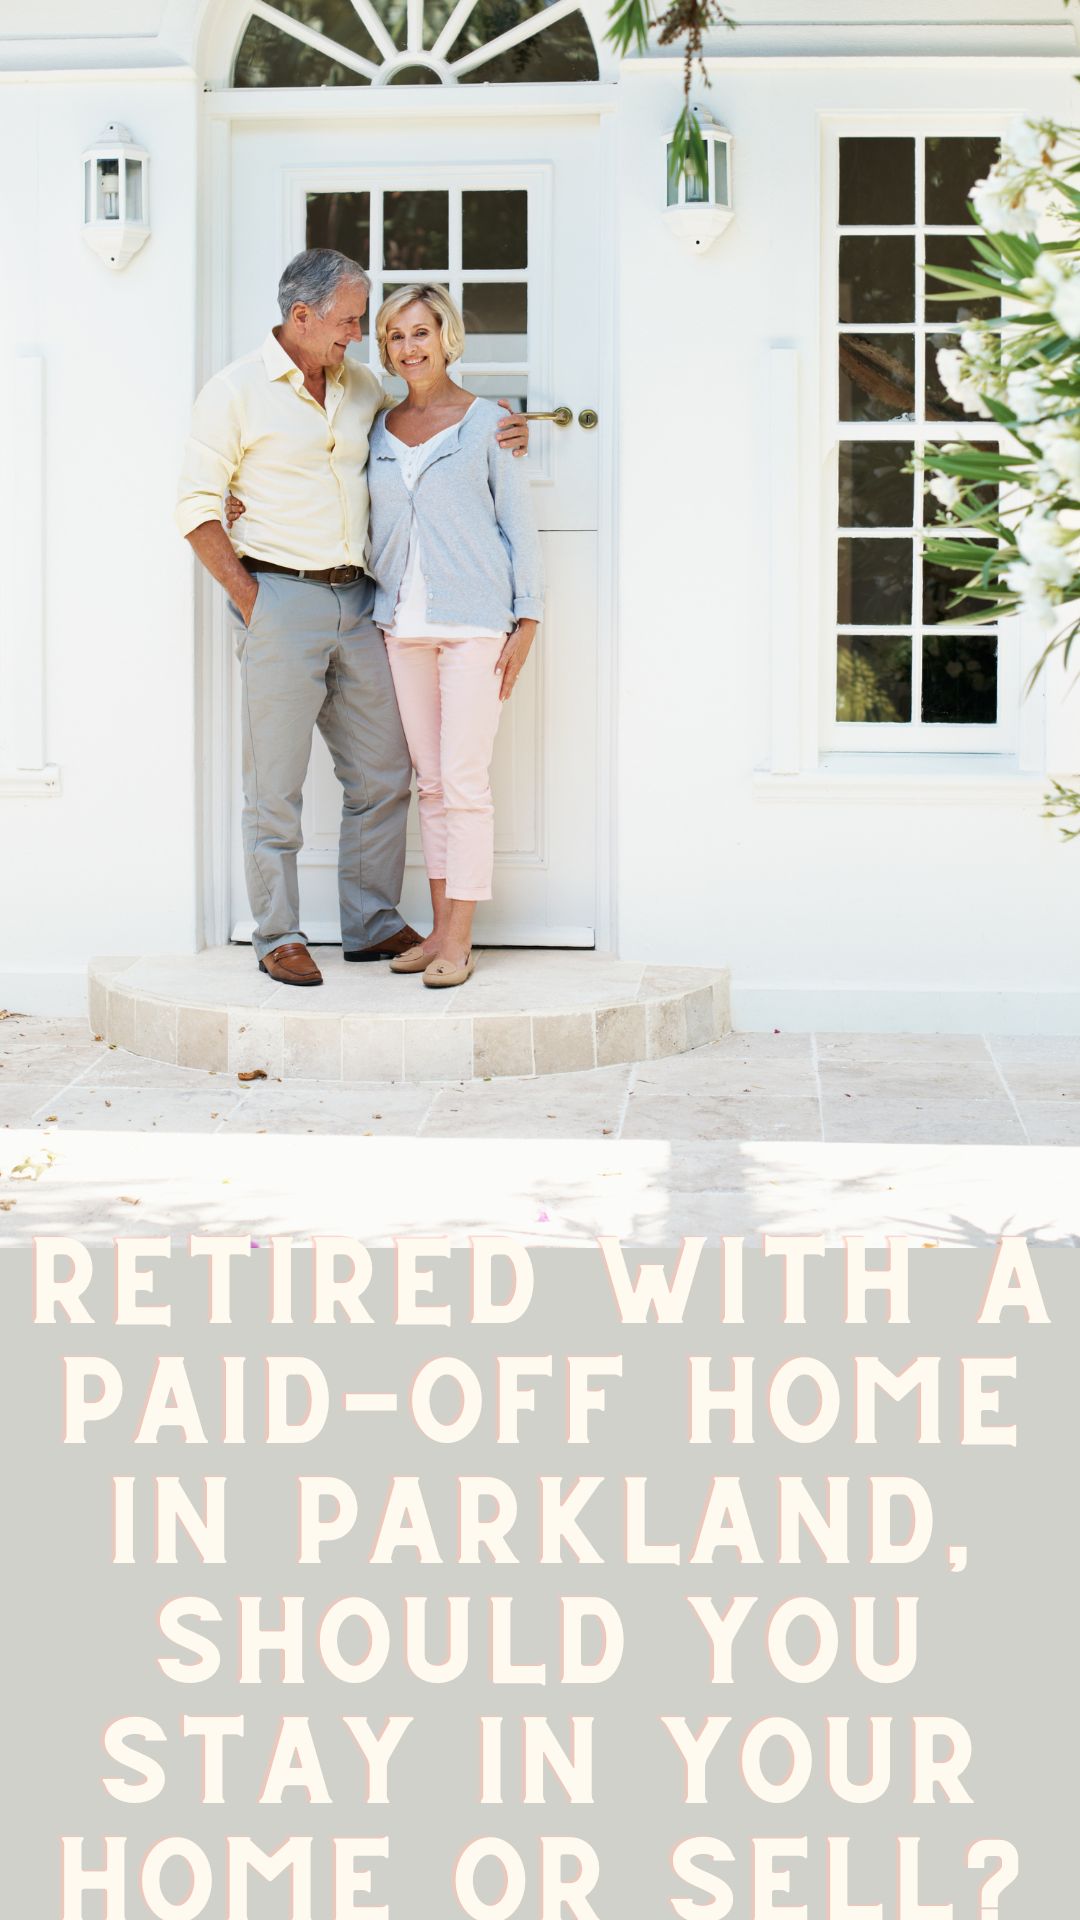 Retired with a Paid-off Home In Parkland, Should You Stay in Your Home or Sell?